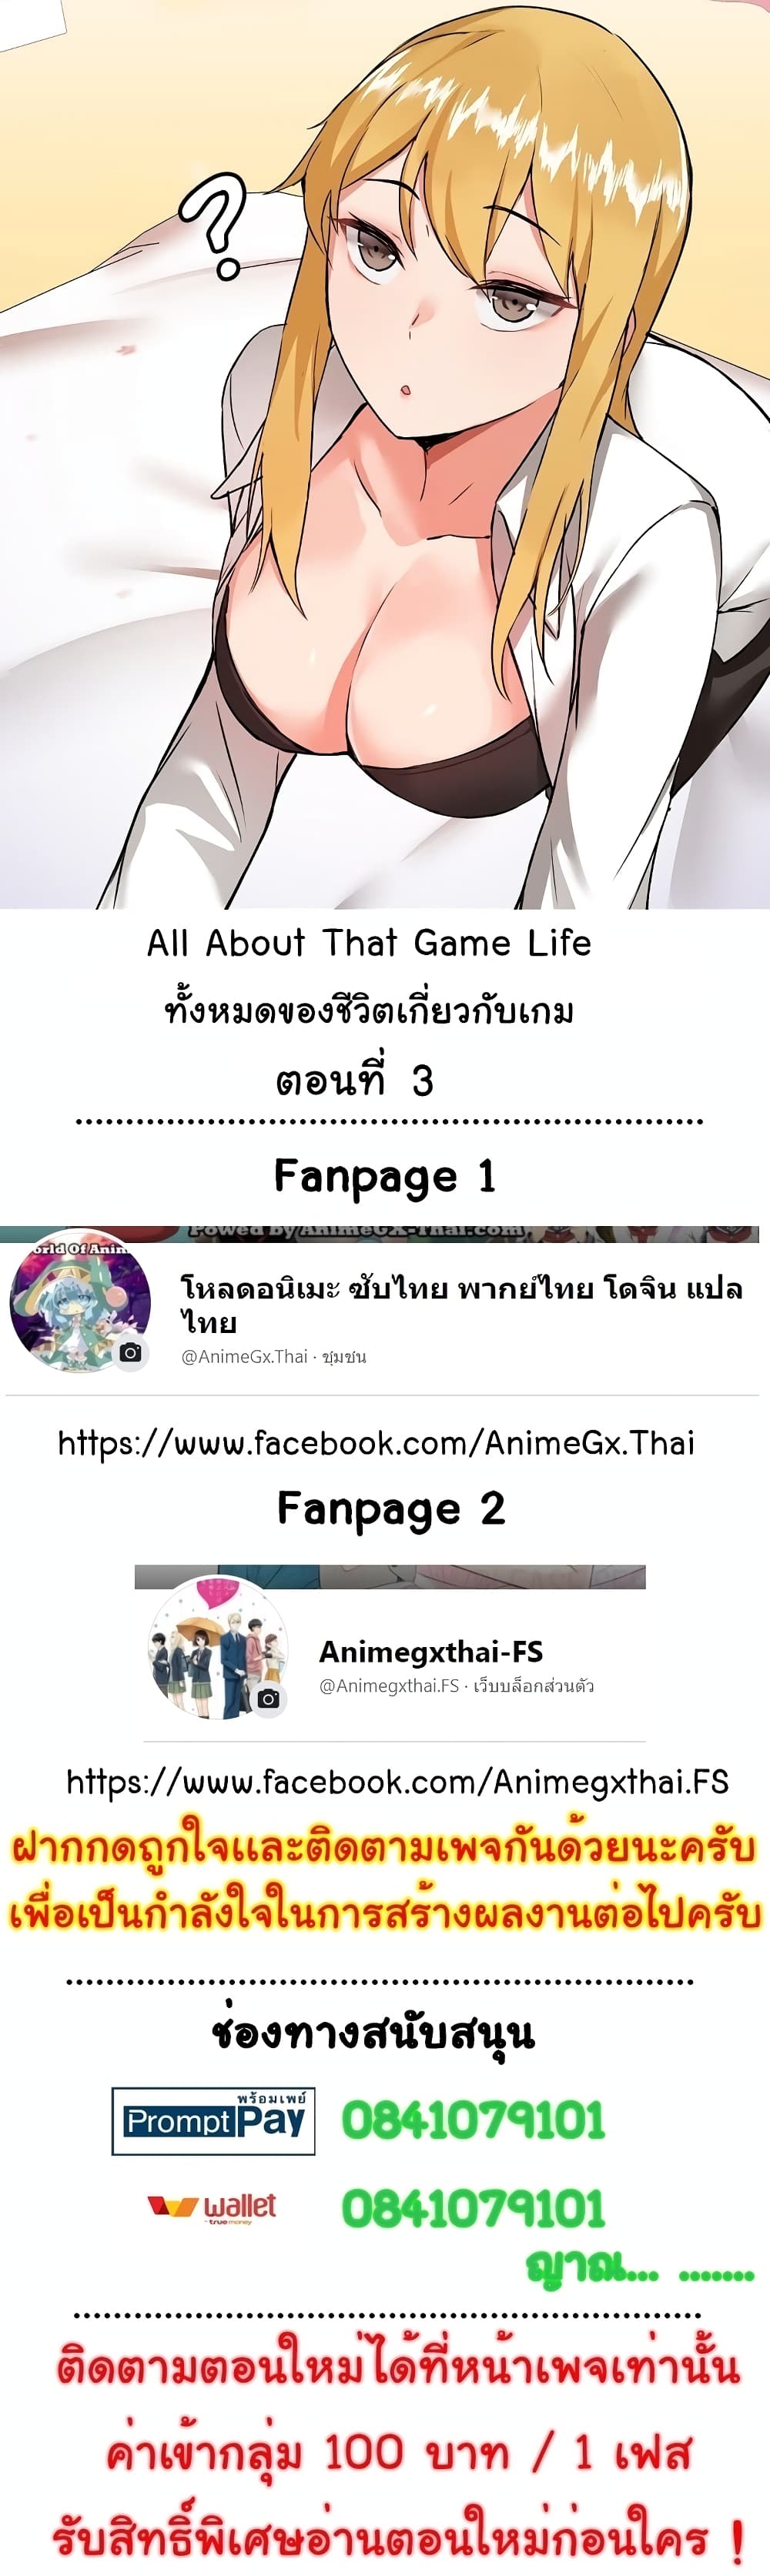 All About That Game Life3 (1)